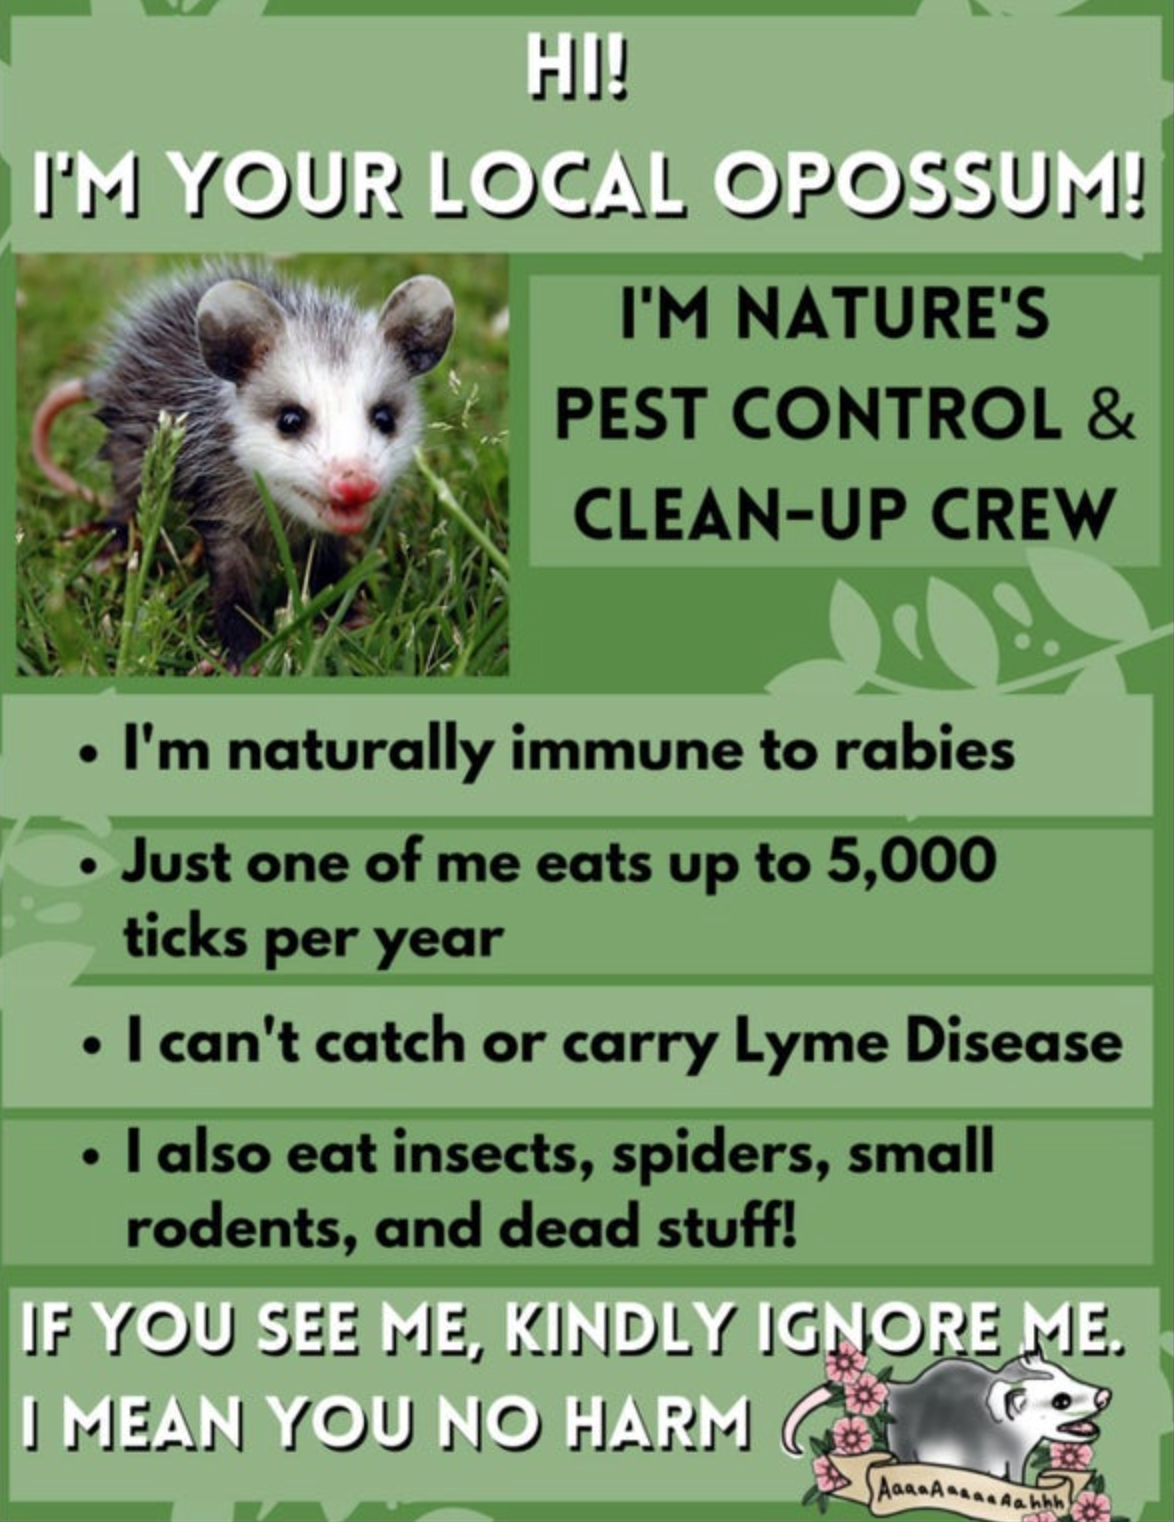 helpful guides to life - possums are part of the neighborhood pest control